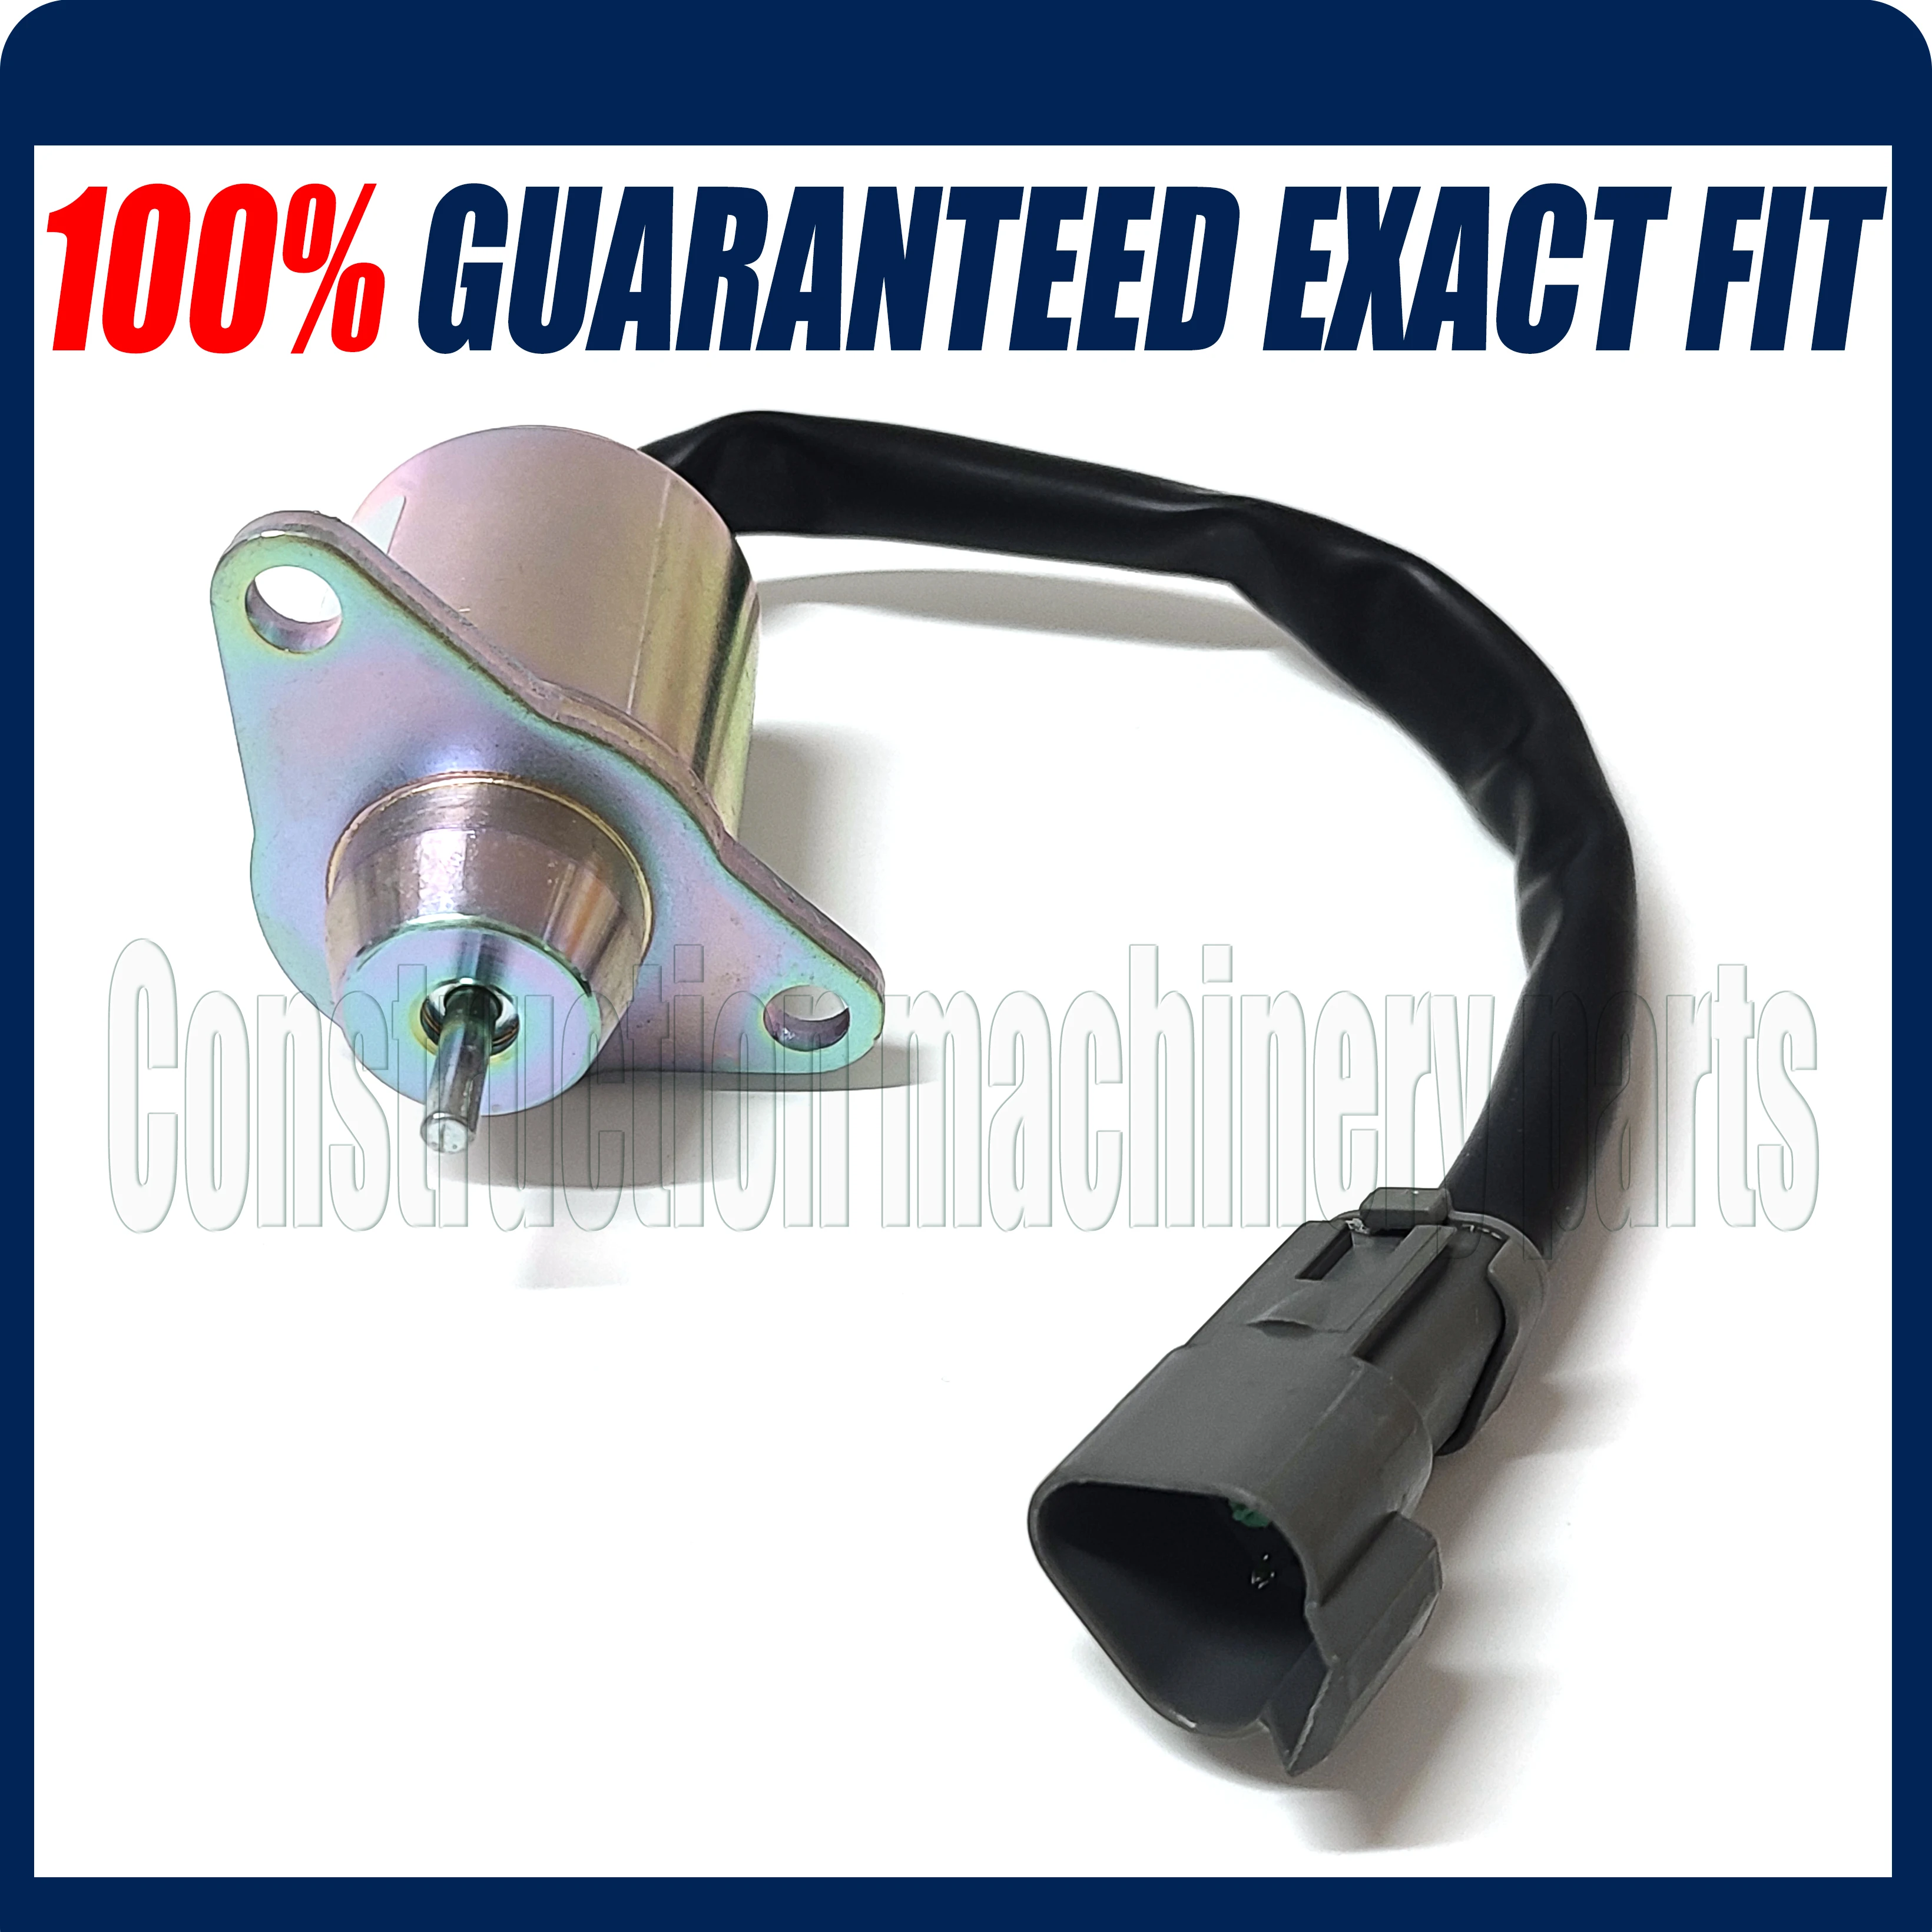 Shiwaki Great Performance Fuel Shut Off Solenoid Replace For Thermo King 41-6383 